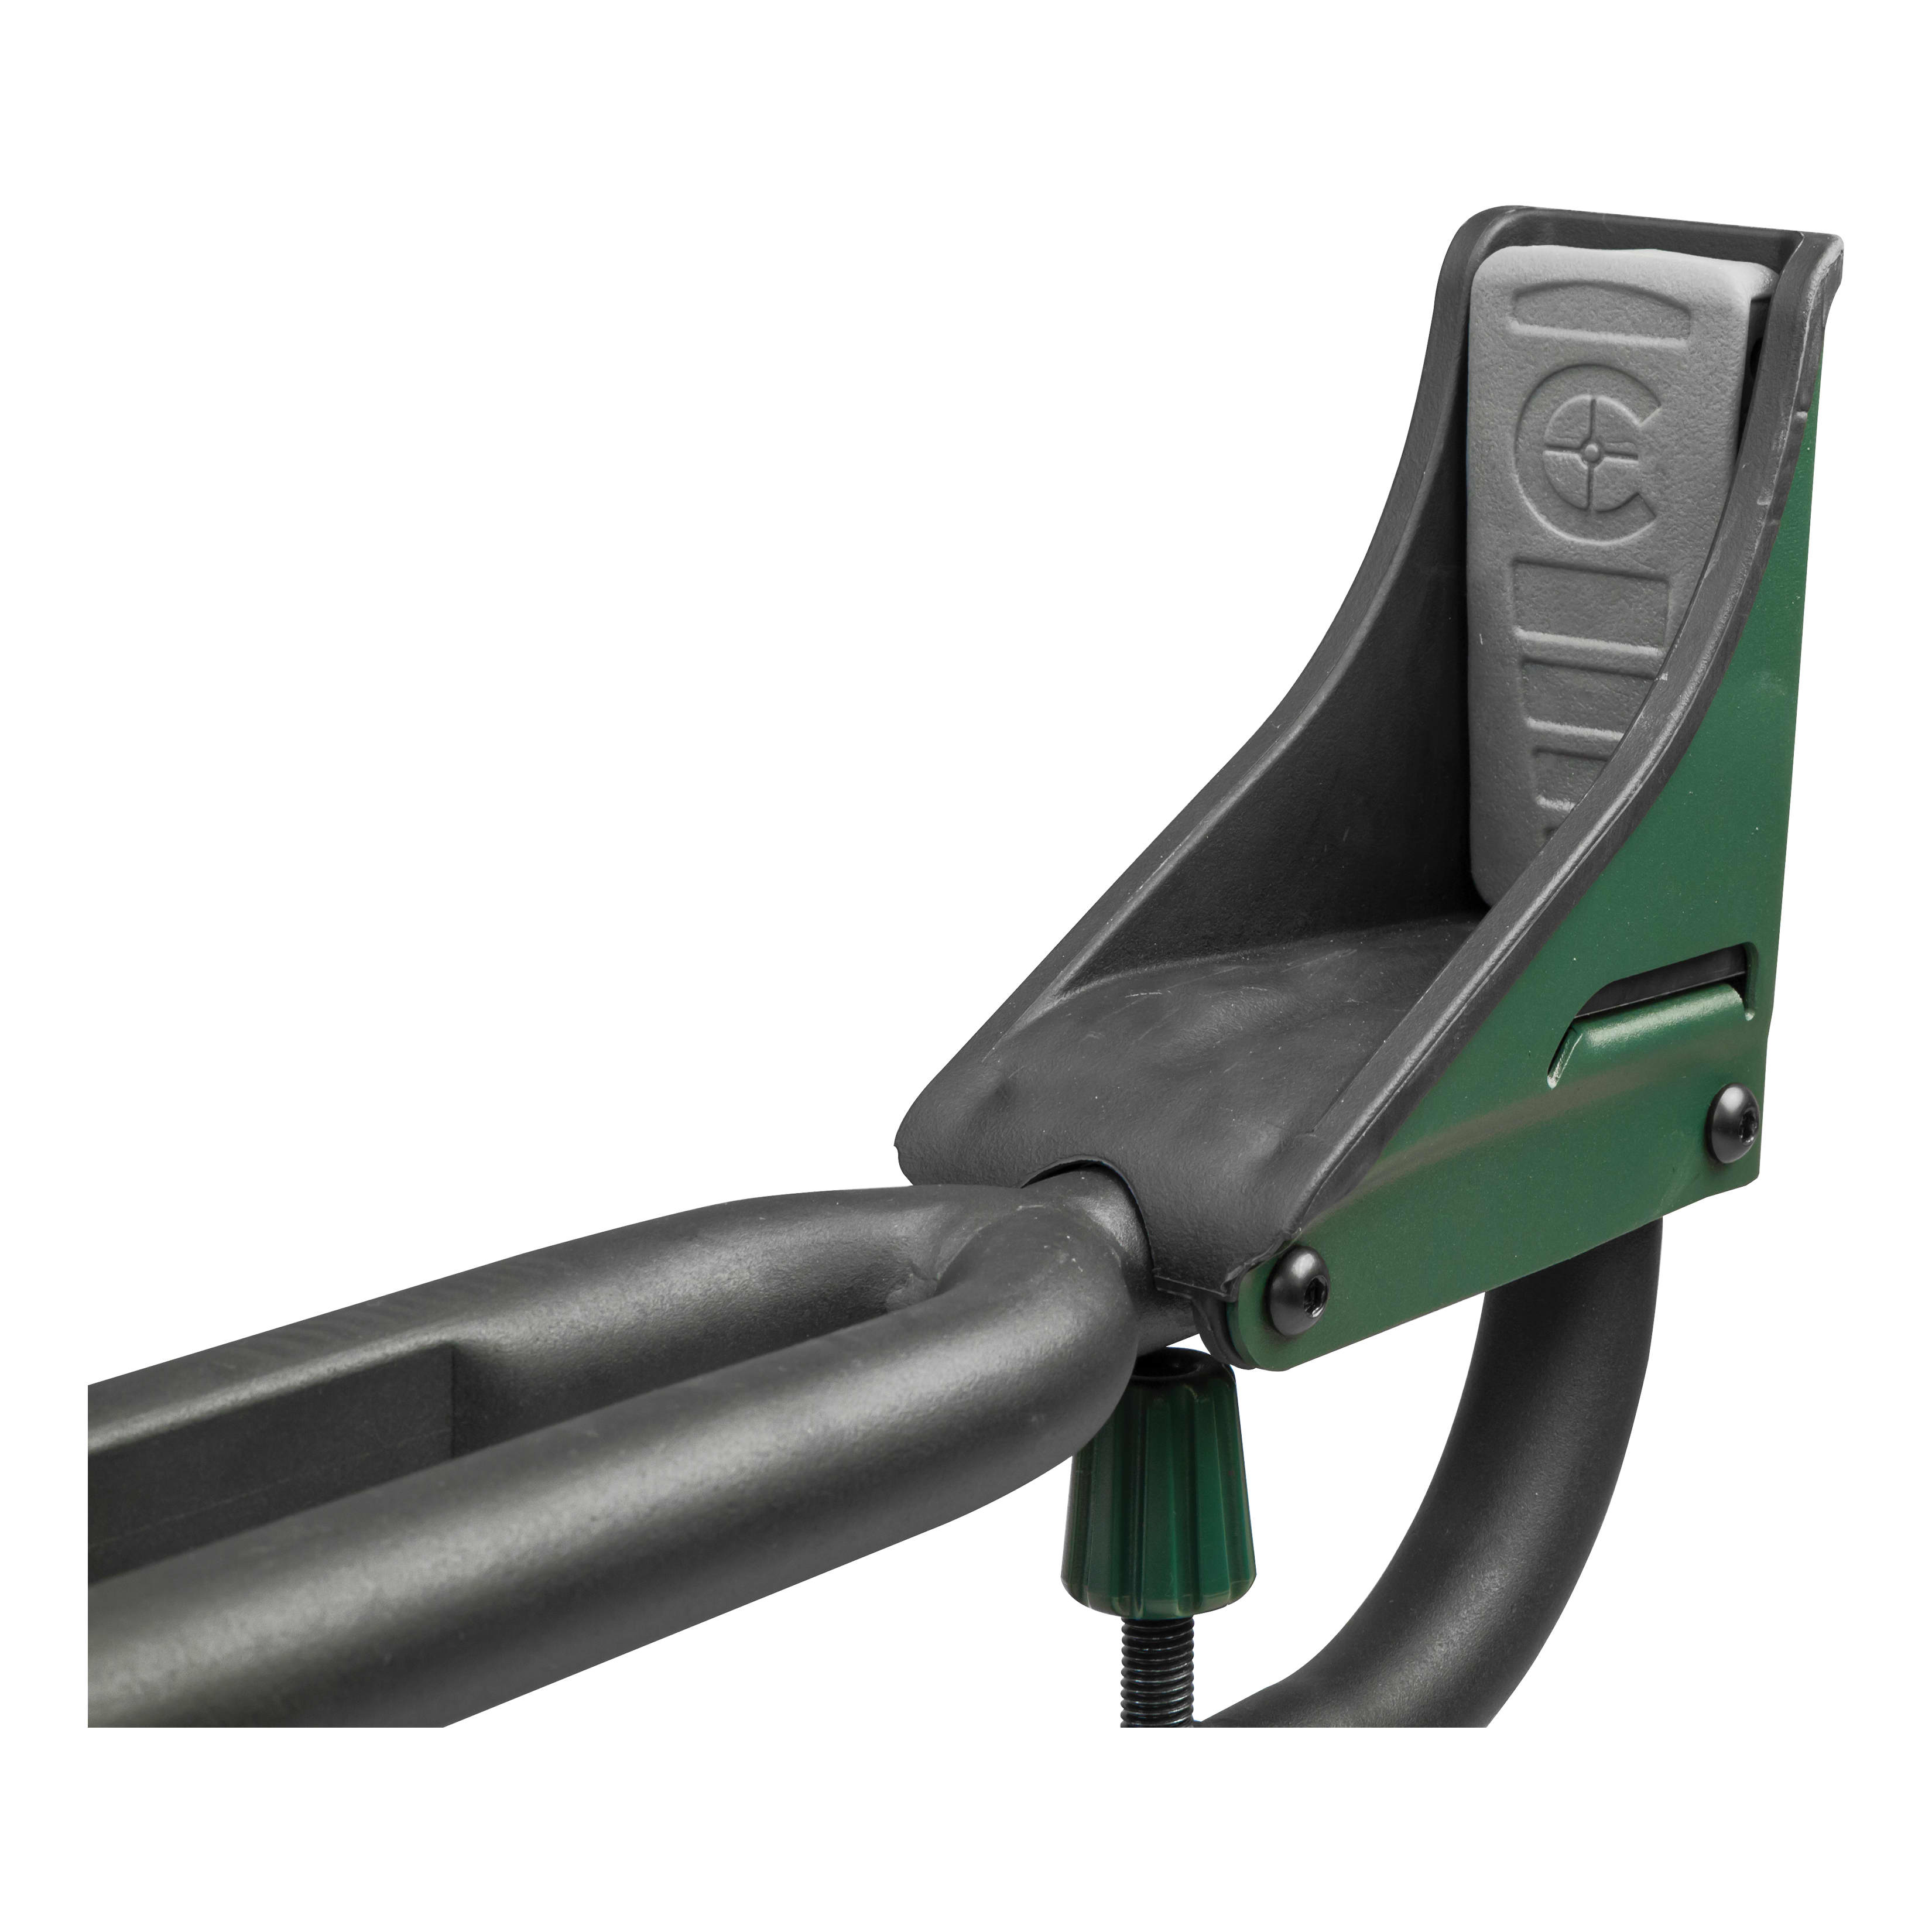 Caldwell® Lead Sled DFT® 2 Rest - Green - Rear Cradle Pad,Caldwell® Lead Sled DFT® 2 Rest - Green - Rear Cradle Pad